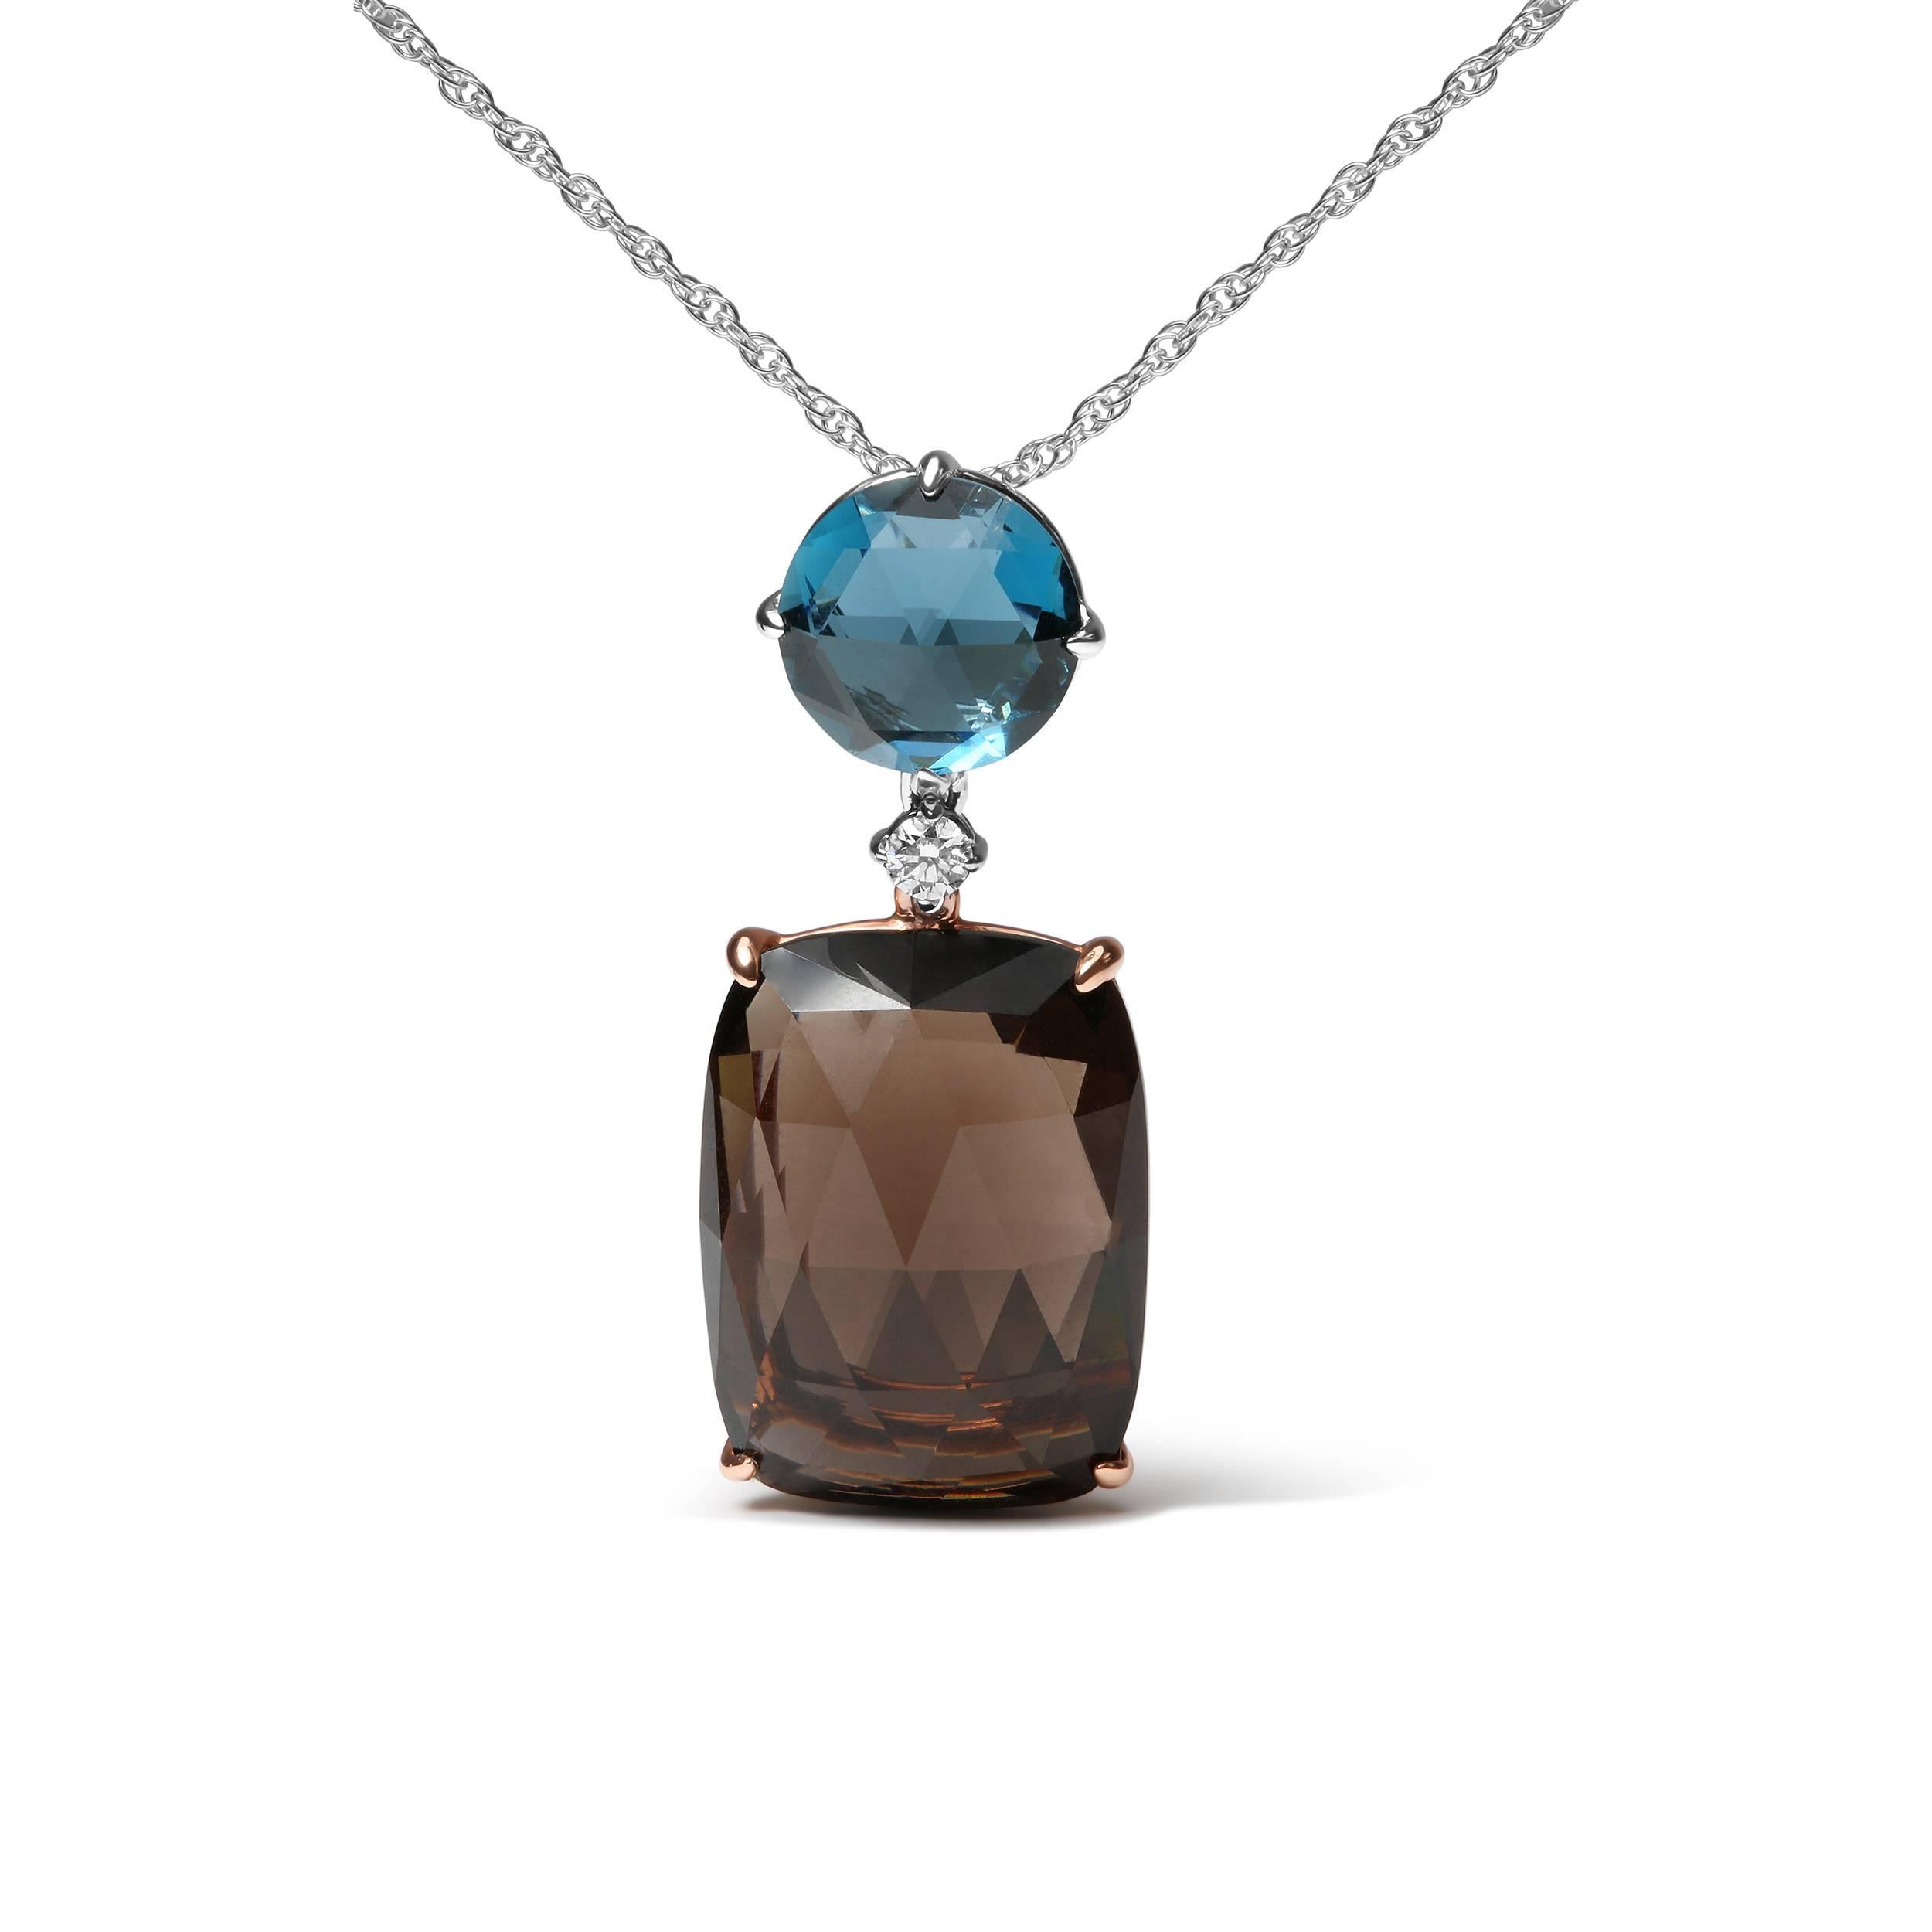 Celebrate any occasion with the beauty and allure of natural gemstones! This lovely pendant necklace is crafted from genuine 18k rose and white gold, a metal that will stay tarnish-free for years to come. The bail is prong-set with a 9x9mm round